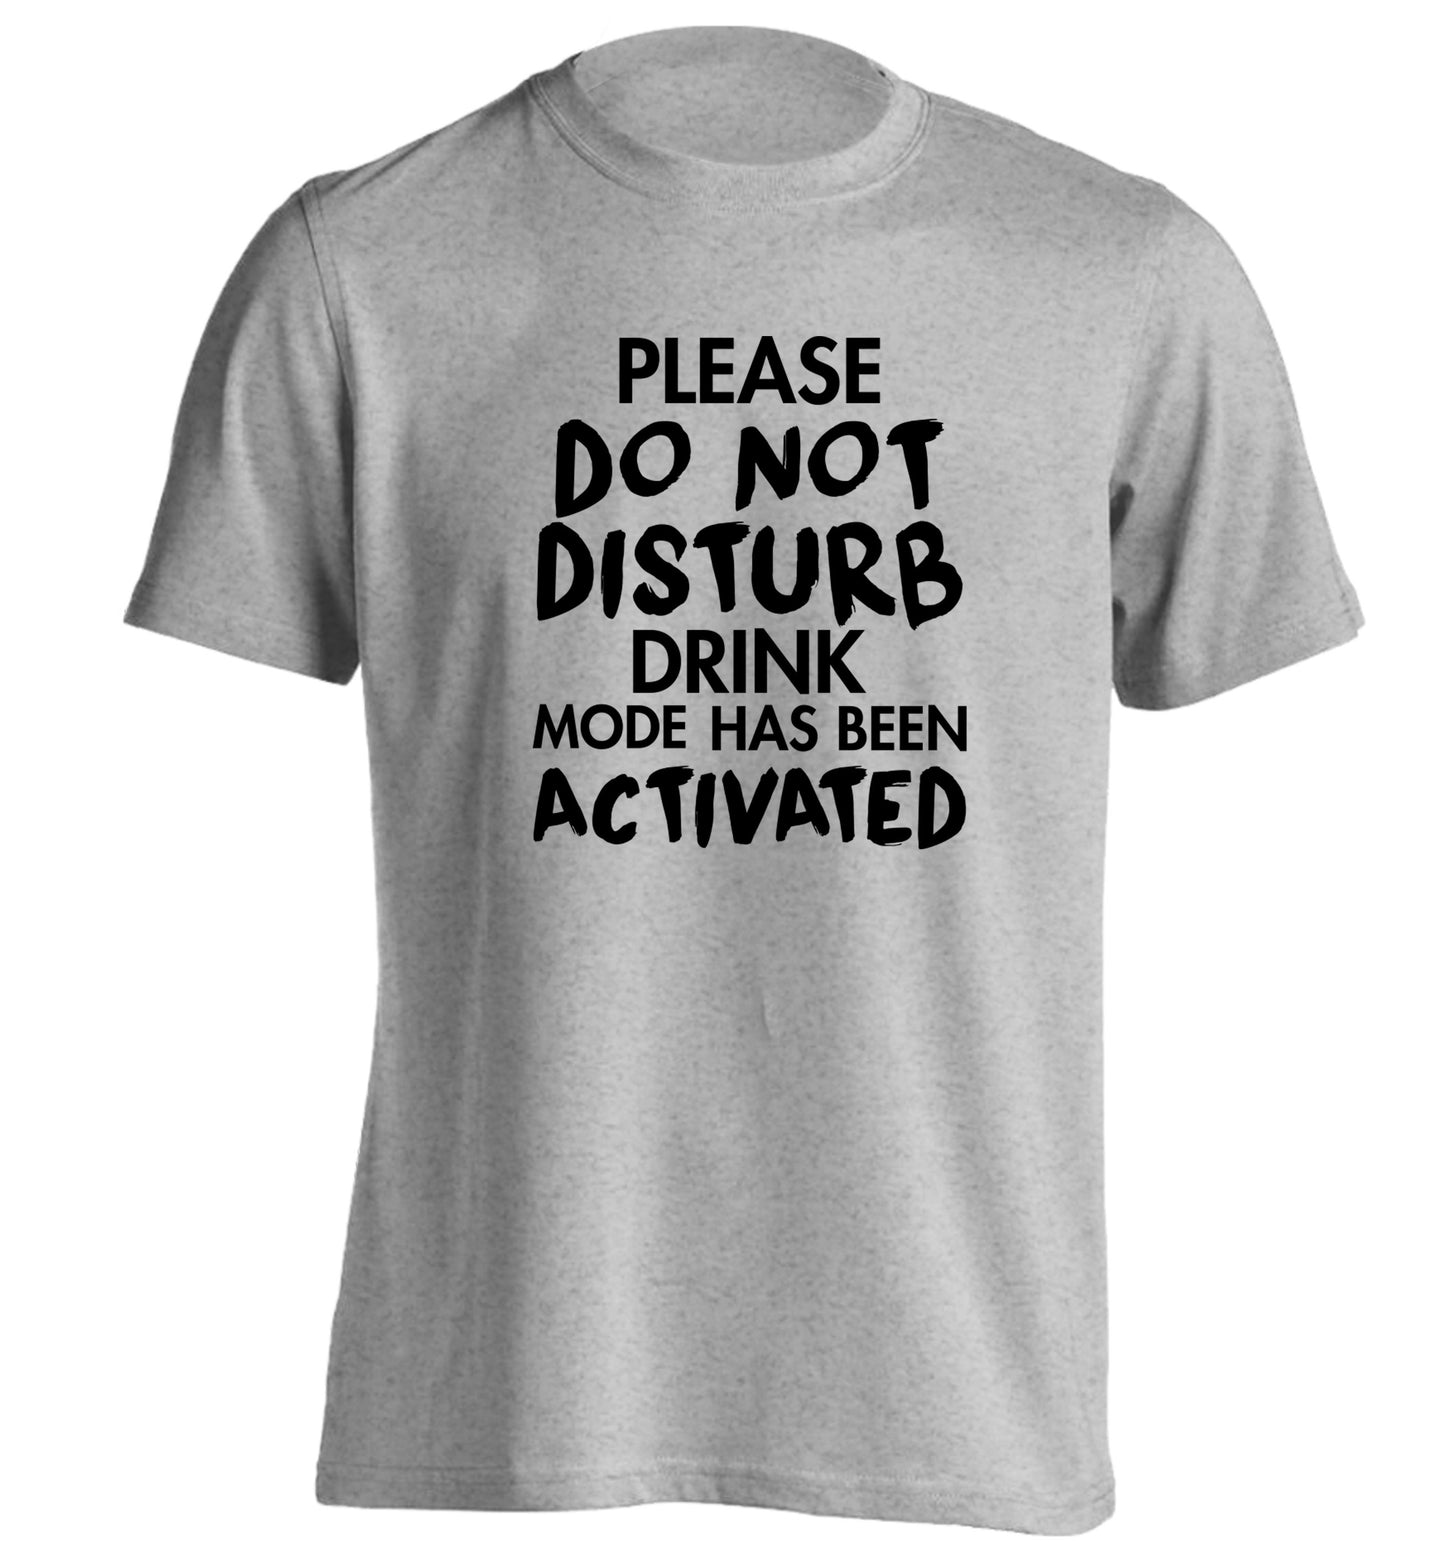 Please do not disturb drink mode has been activated adults unisex grey Tshirt 2XL